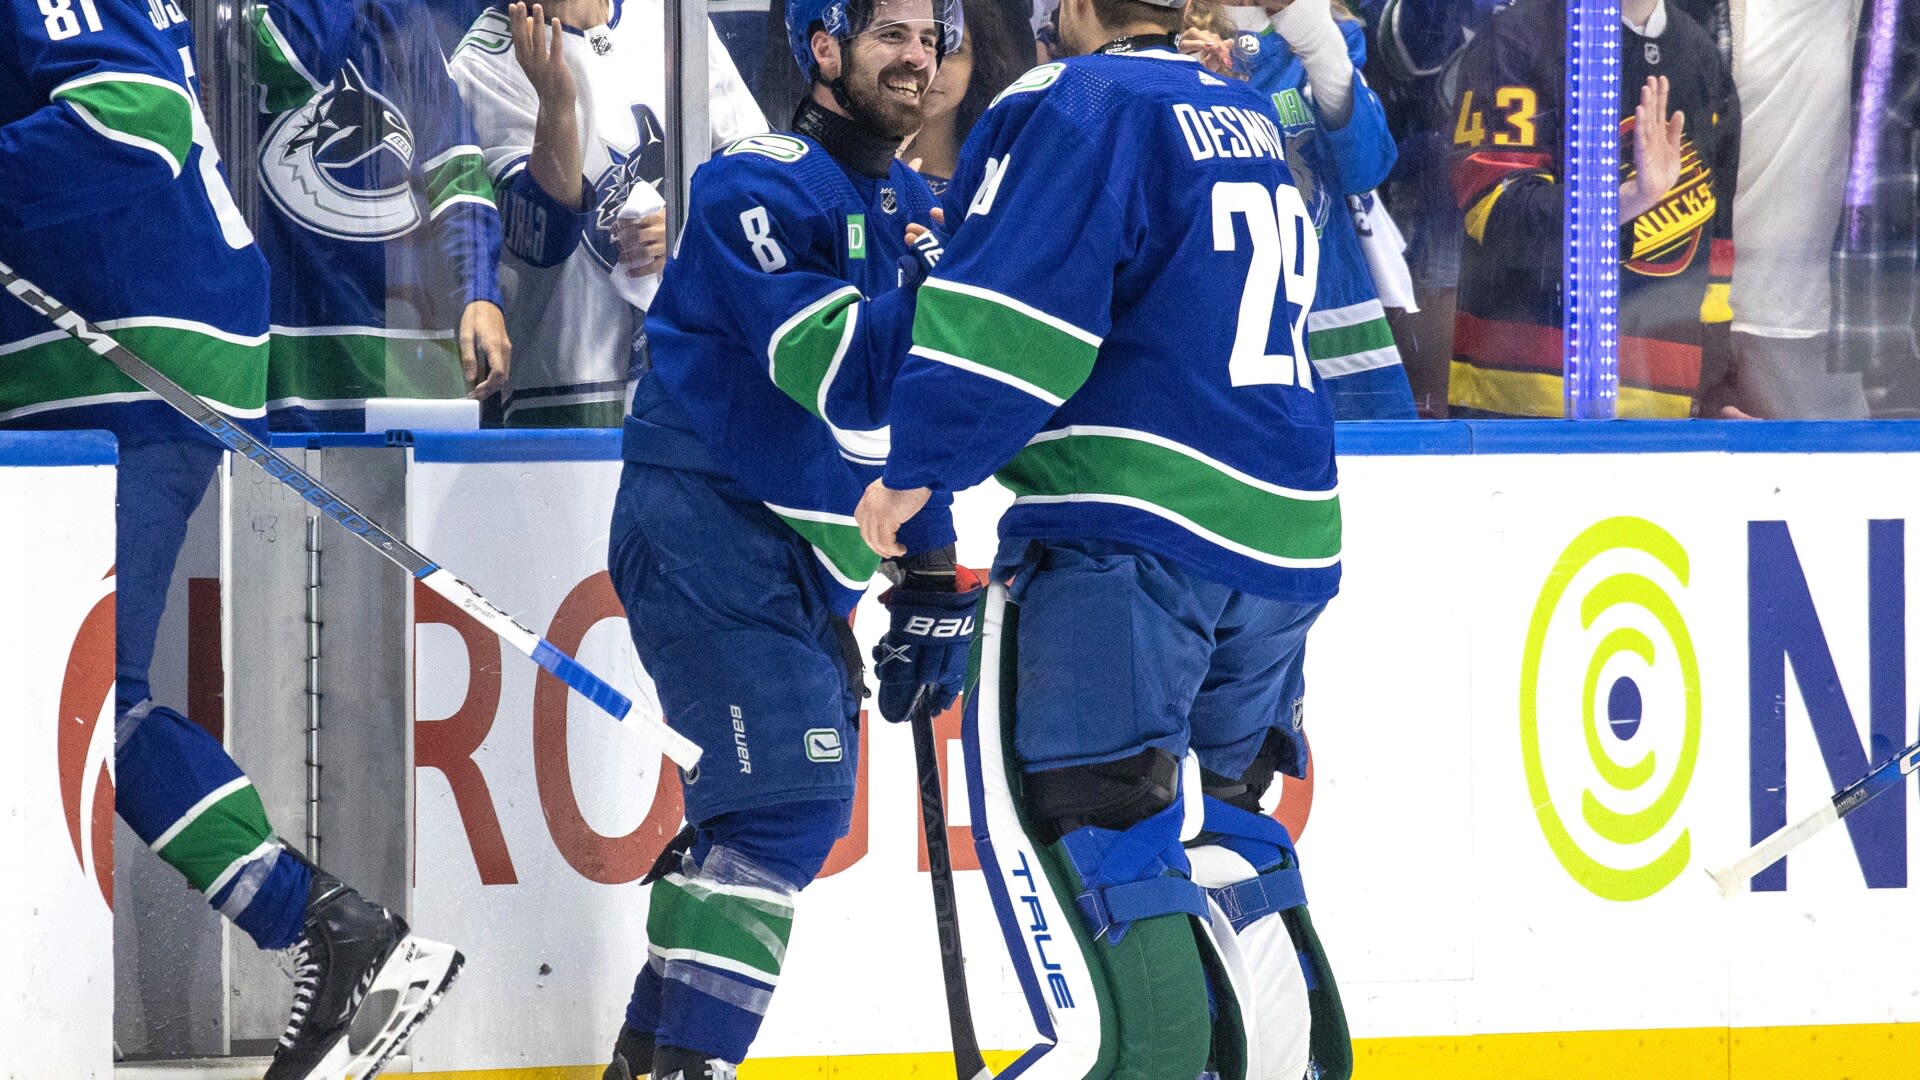 Canucks overcome 3-goal deficit to stun Oilers 5-4 in Game 1